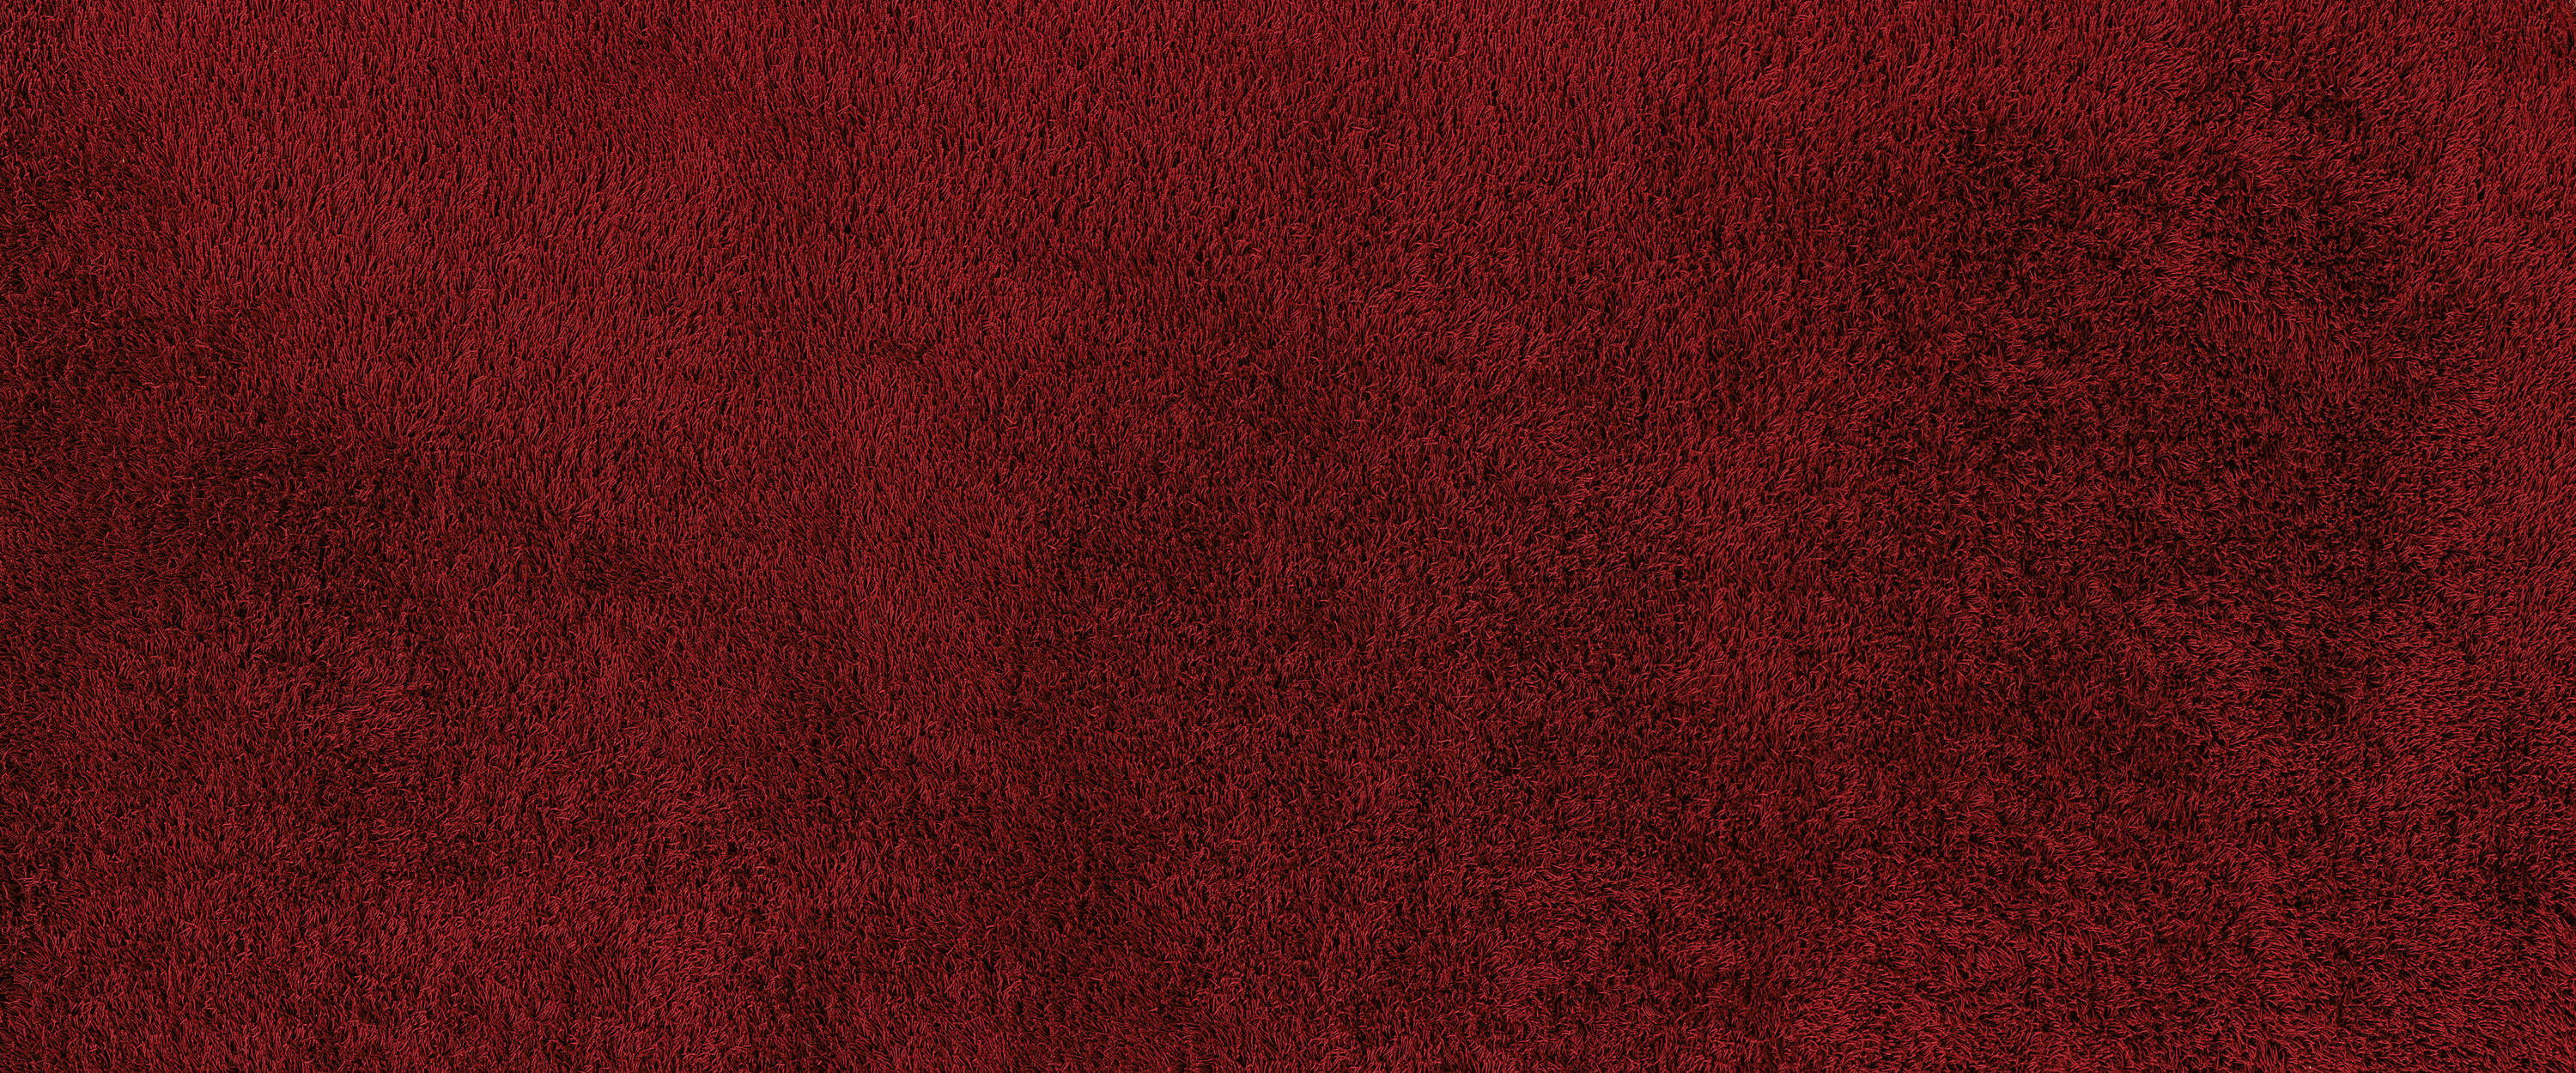             Photo wallpaper detail of a red carpet
        